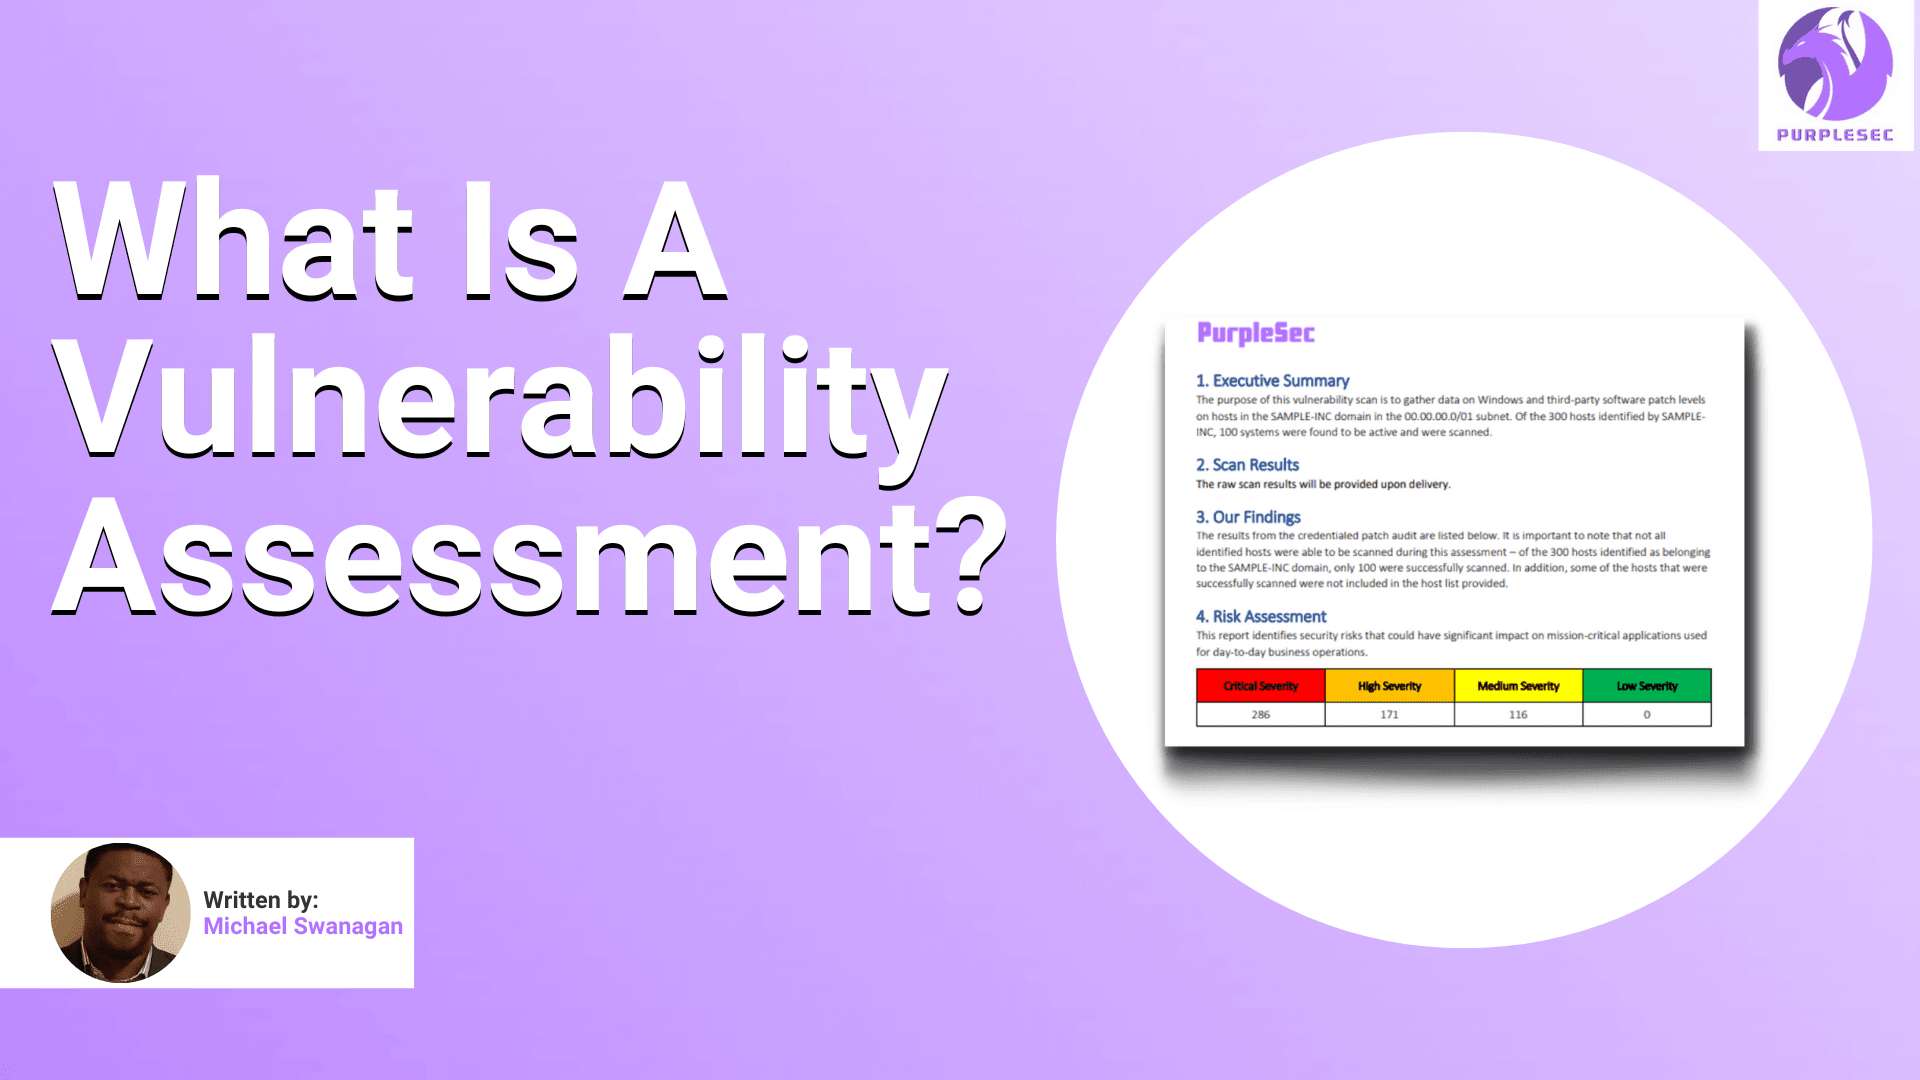 What is a vulnerability assessment